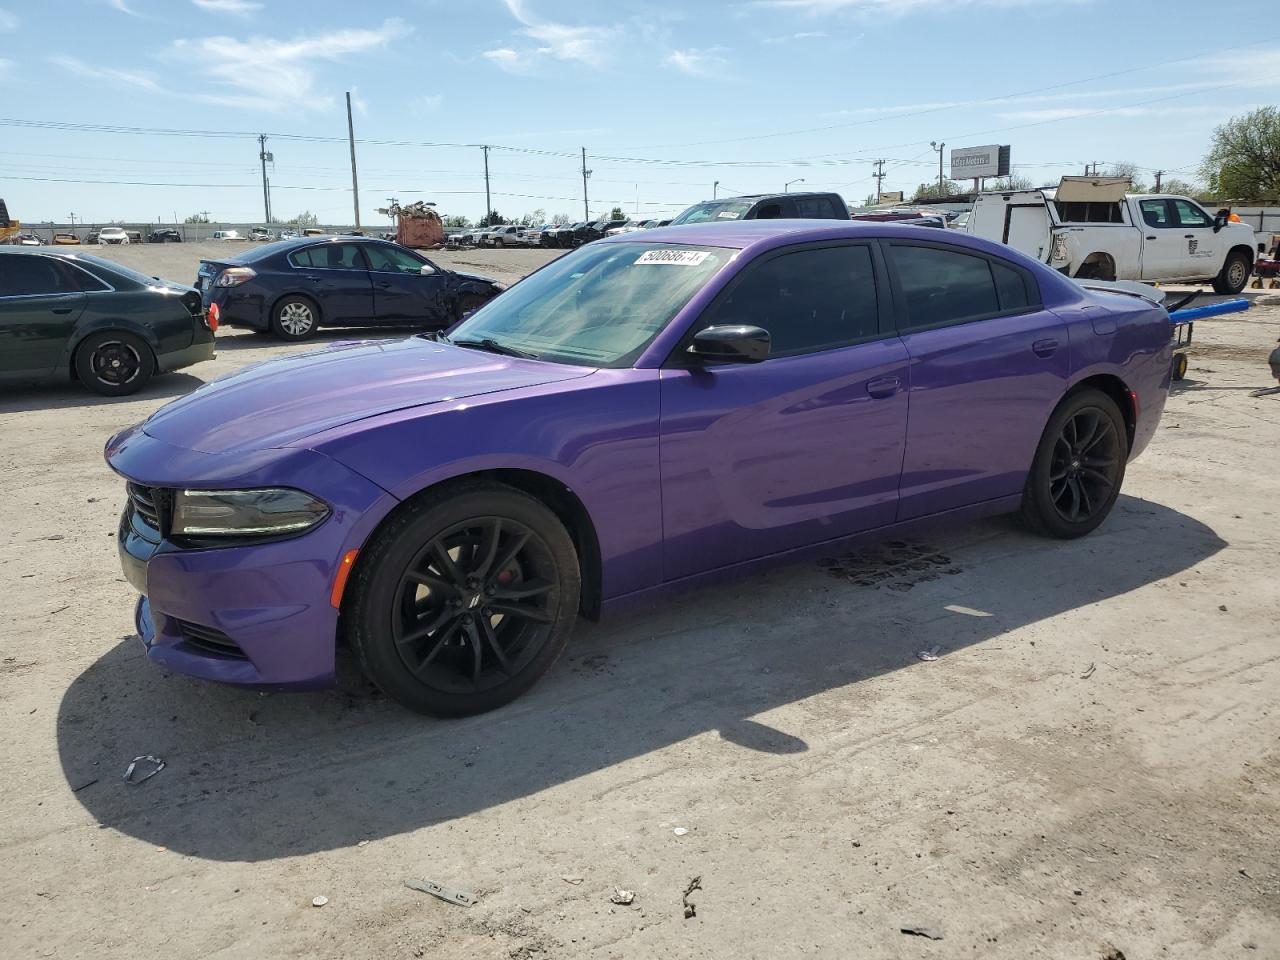 vin: 2C3CDXBGXJH313661 2C3CDXBGXJH313661 2018 dodge charger 3600 for Sale in 73129 8450, Ok - Oklahoma City, Oklahoma City, Oklahoma, USA